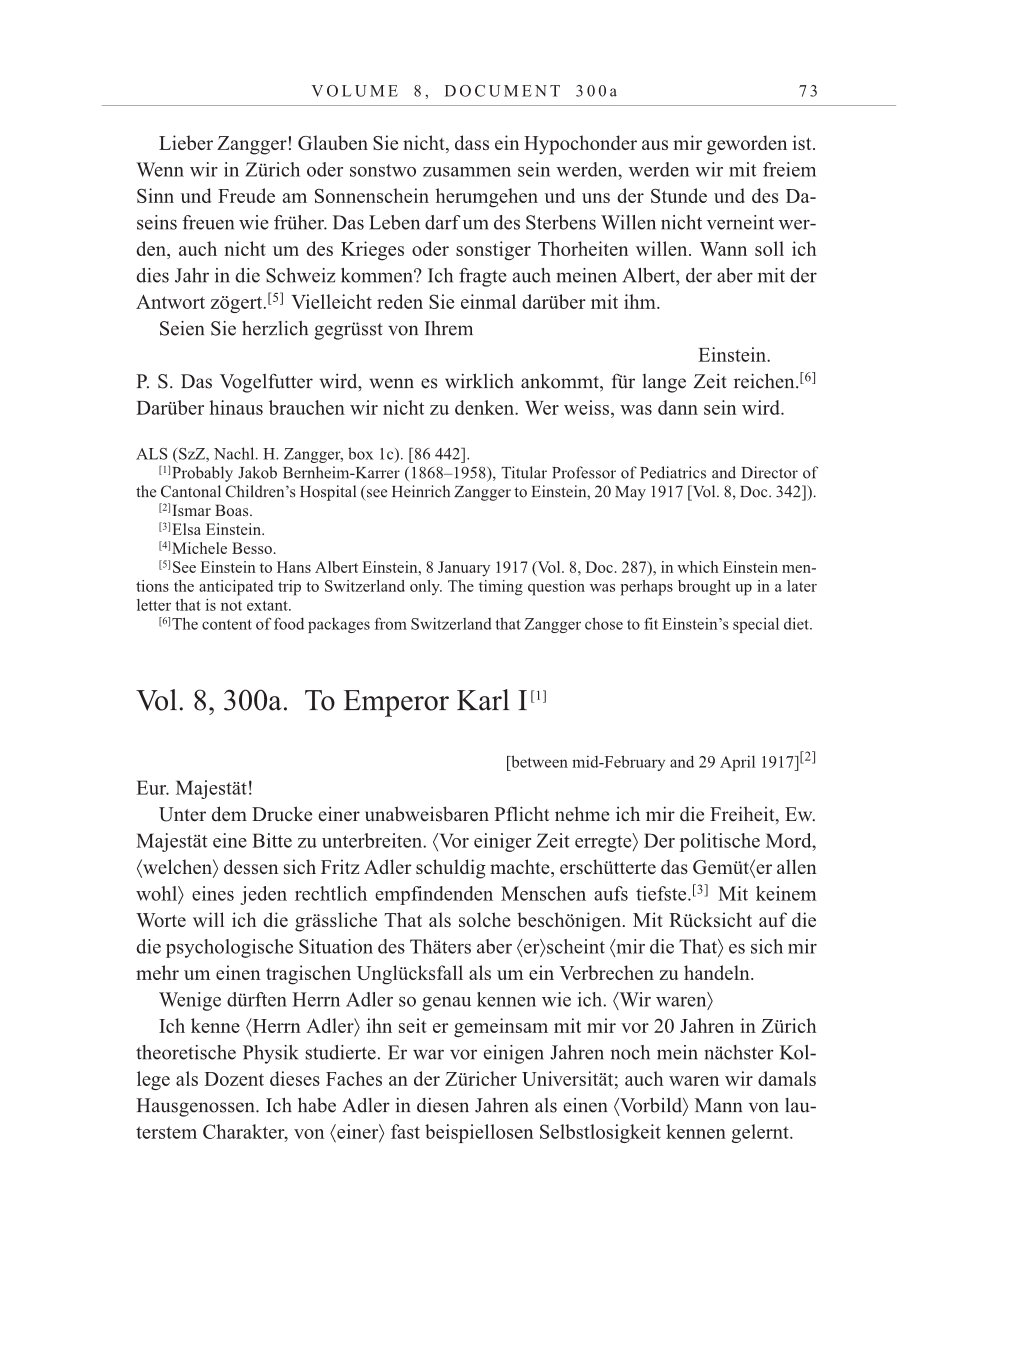 Volume 10: The Berlin Years: Correspondence May-December 1920 / Supplementary Correspondence 1909-1920 page 73